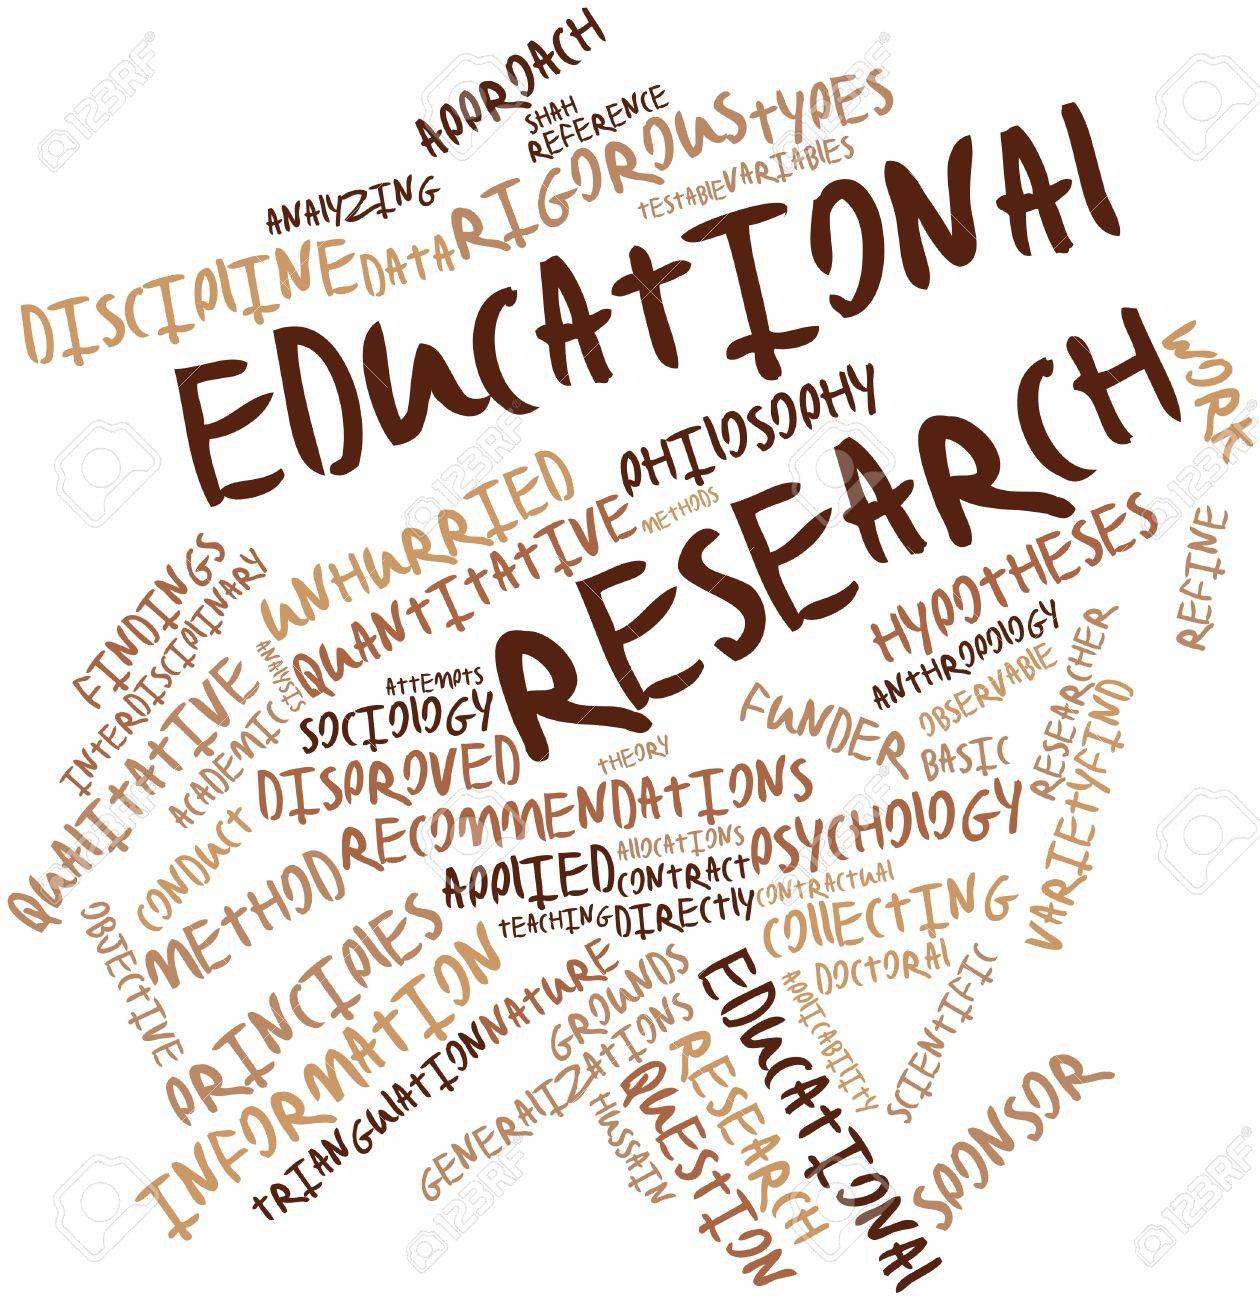 studies in educational research and development